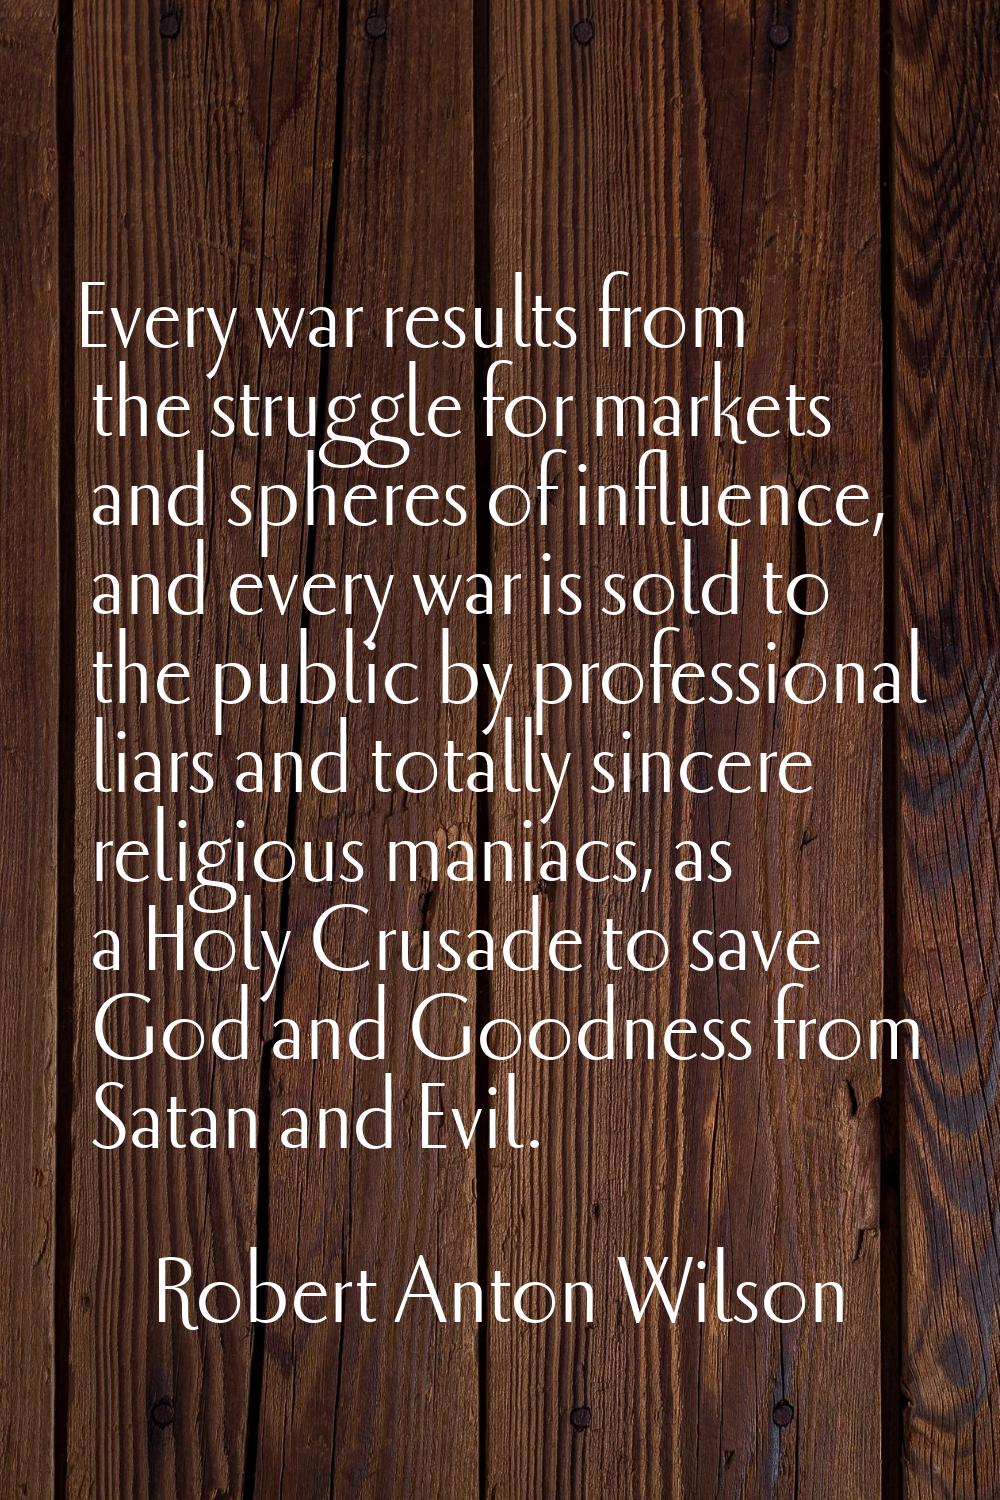 Every war results from the struggle for markets and spheres of influence, and every war is sold to 